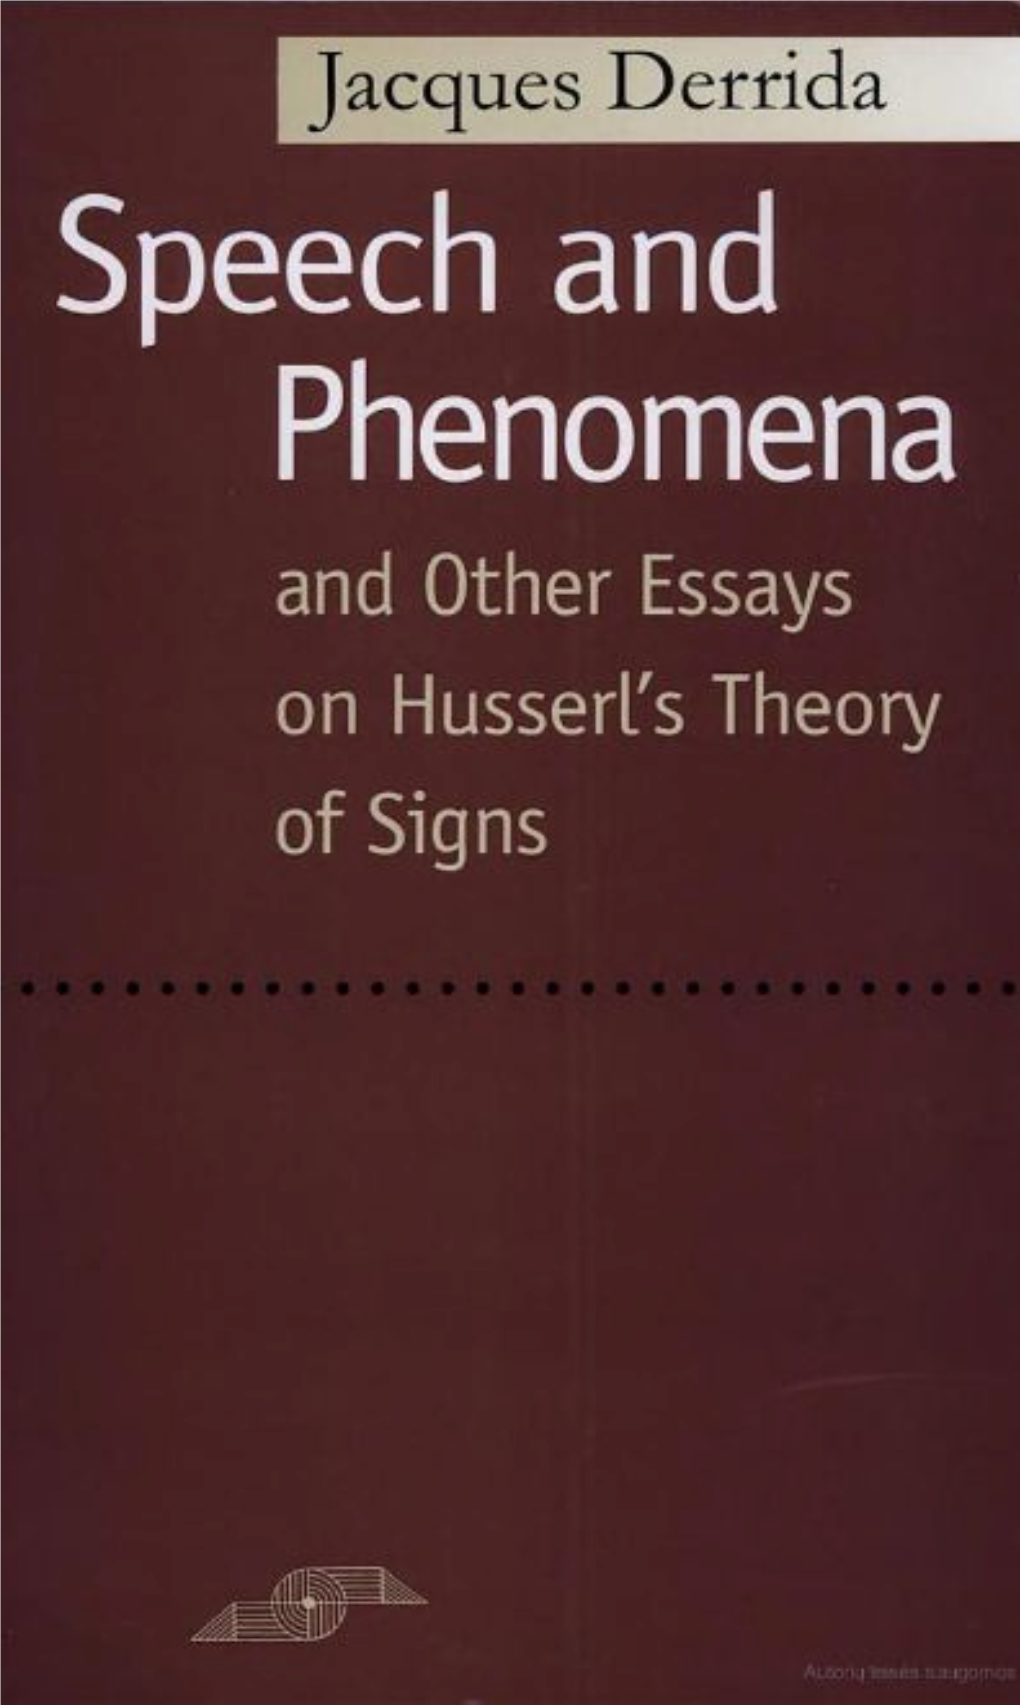 Speech and Phenomena and Other Essays on Husservs Theory of Signs